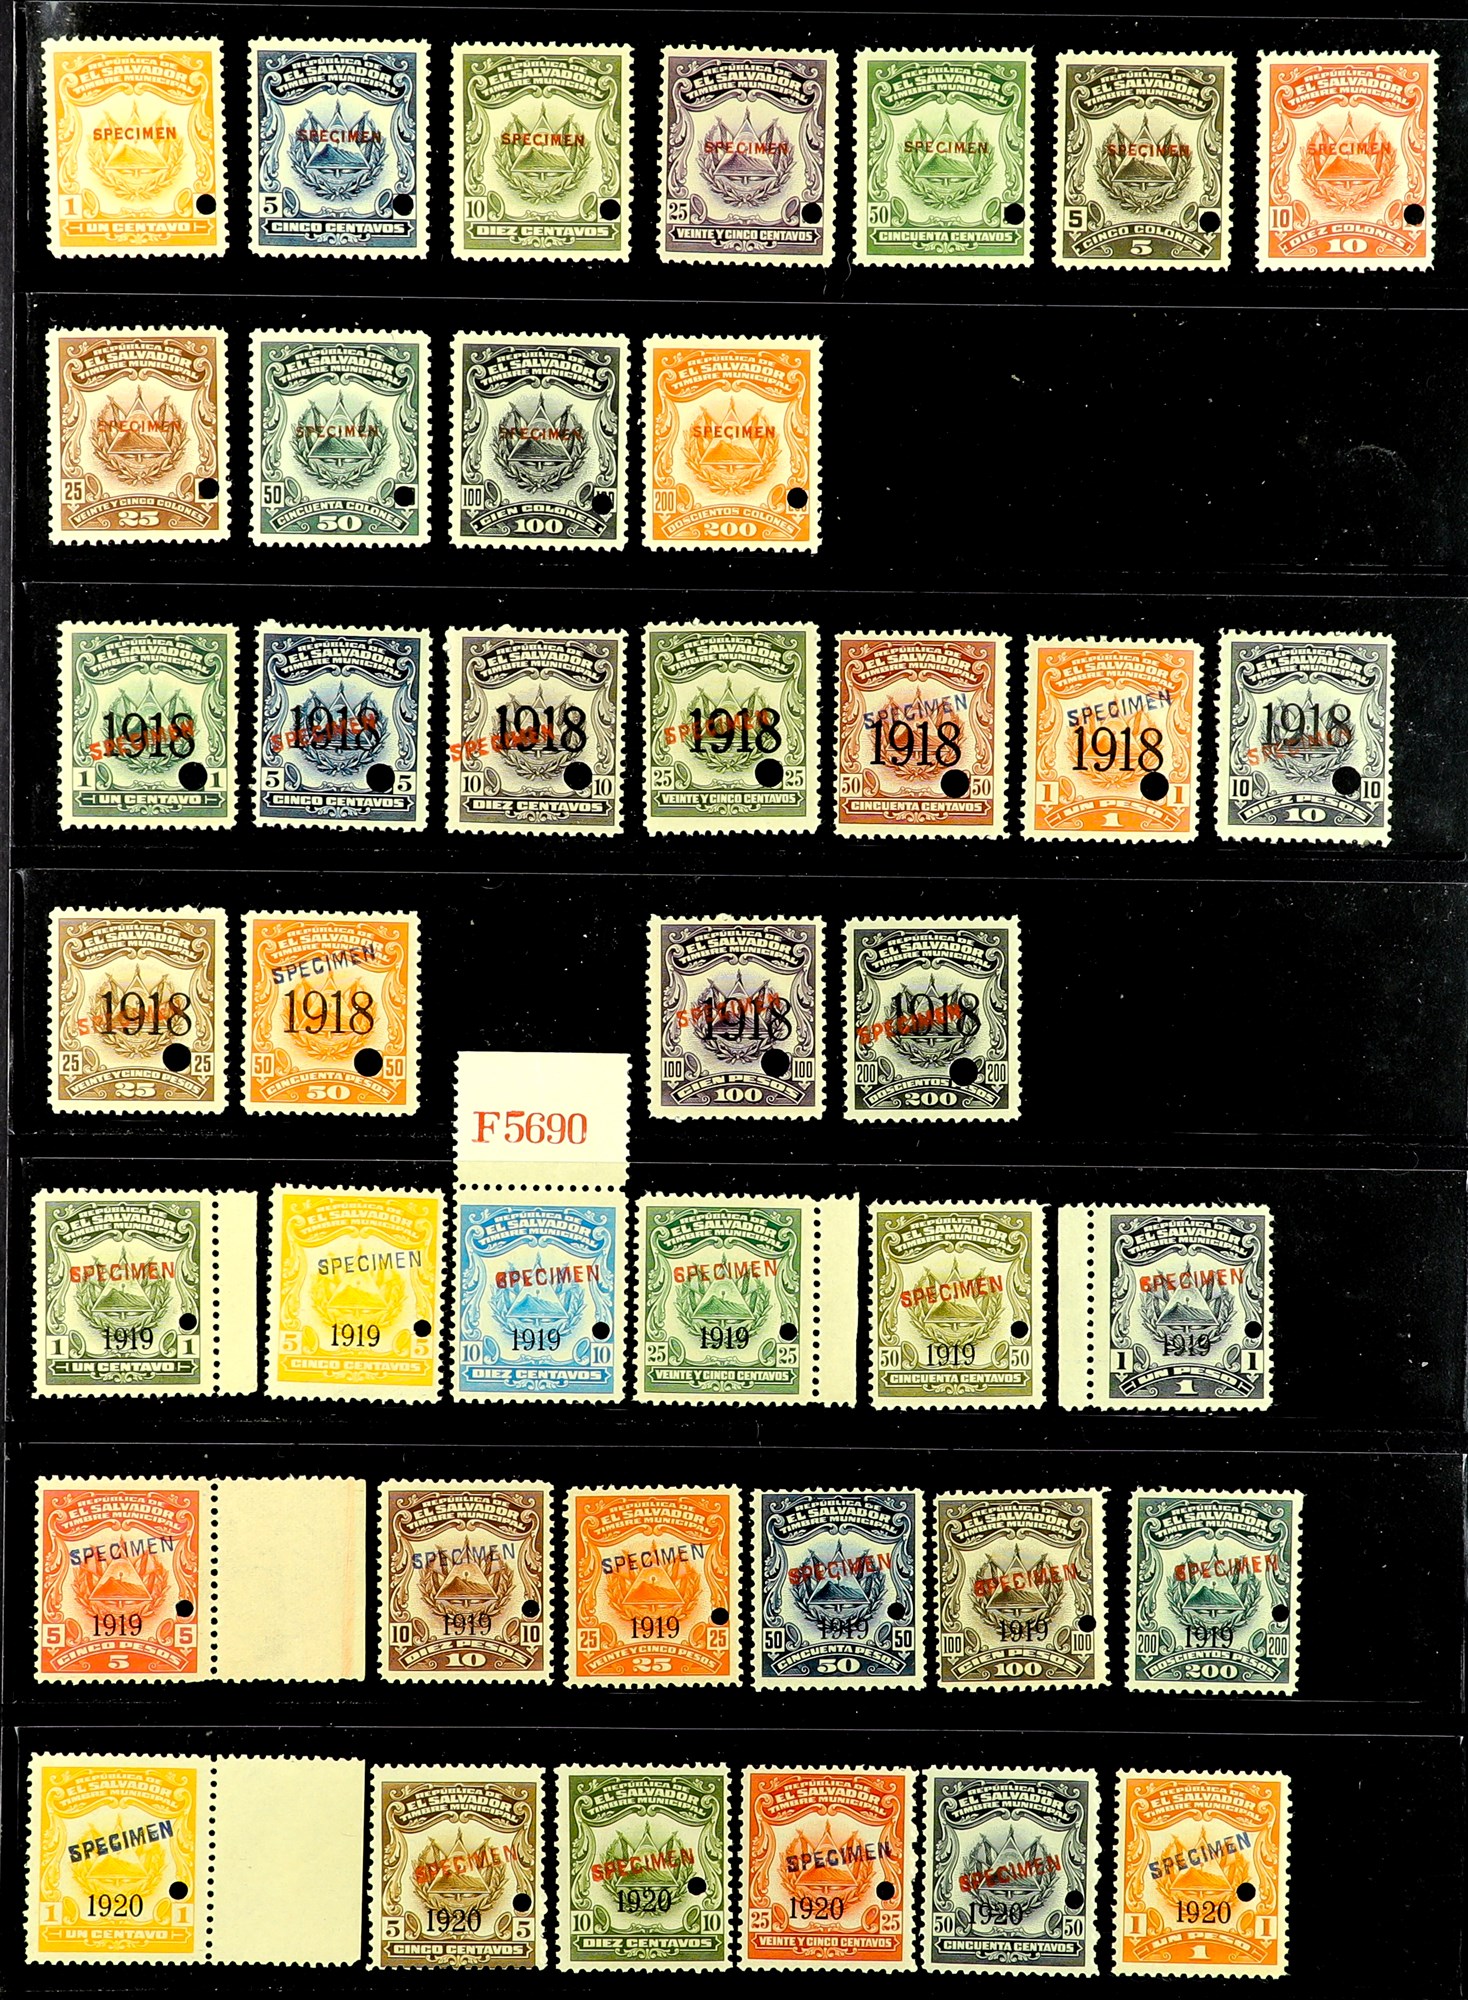 EL SALVADOR 1918 - 1933 'TIMBRE MUNICIPAL' REVENUE STAMPS collection of 180+ never hinged mint